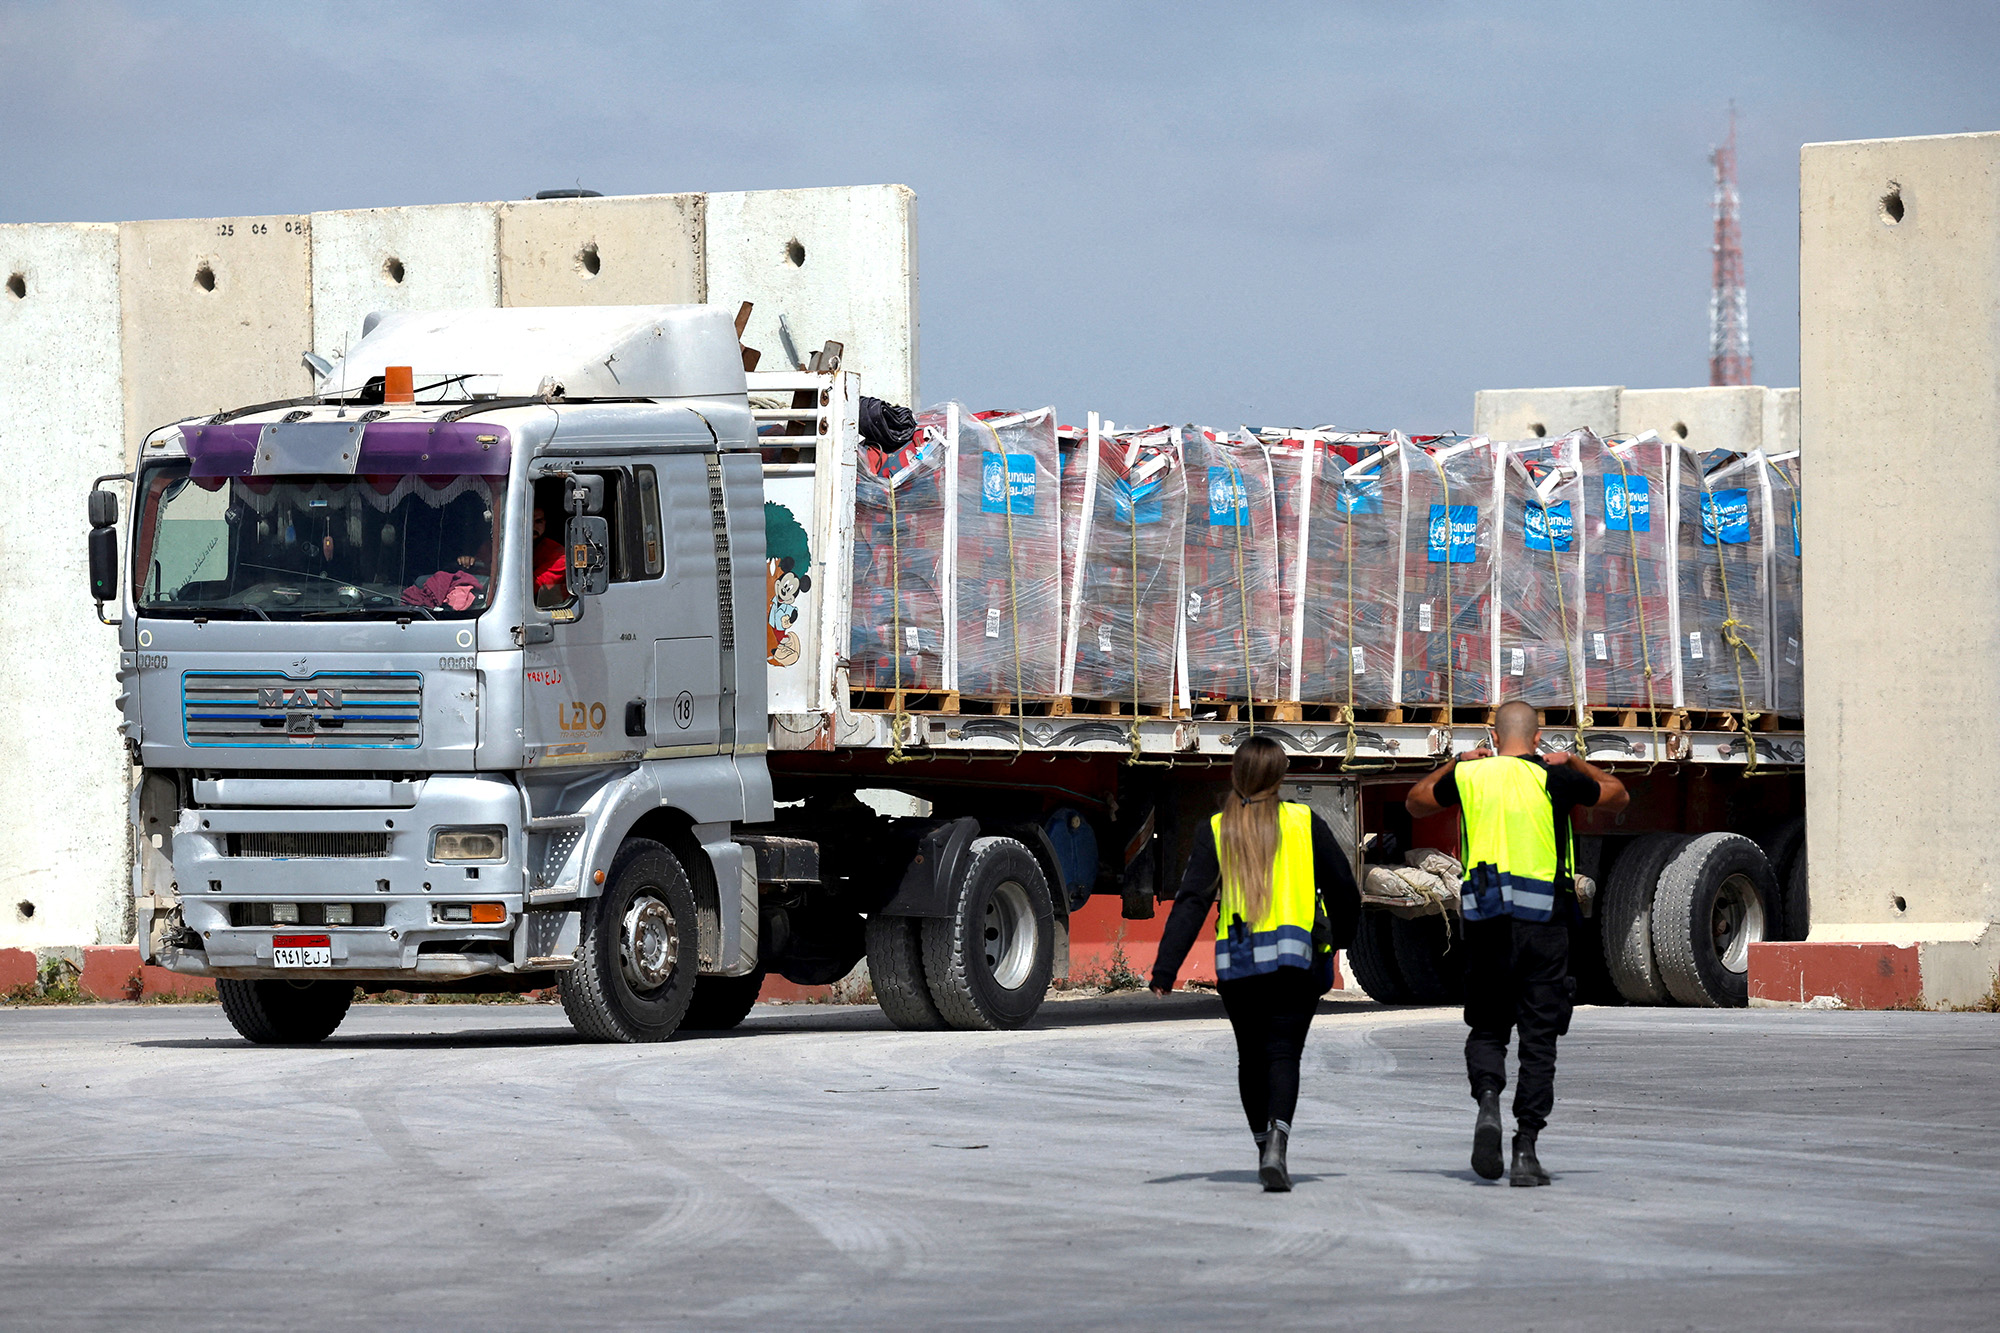 A truck carrying humanitarian aid bound for Gaza arrives at the inspection area at the Kerem Shalom crossing in southern Israel, on March 14.